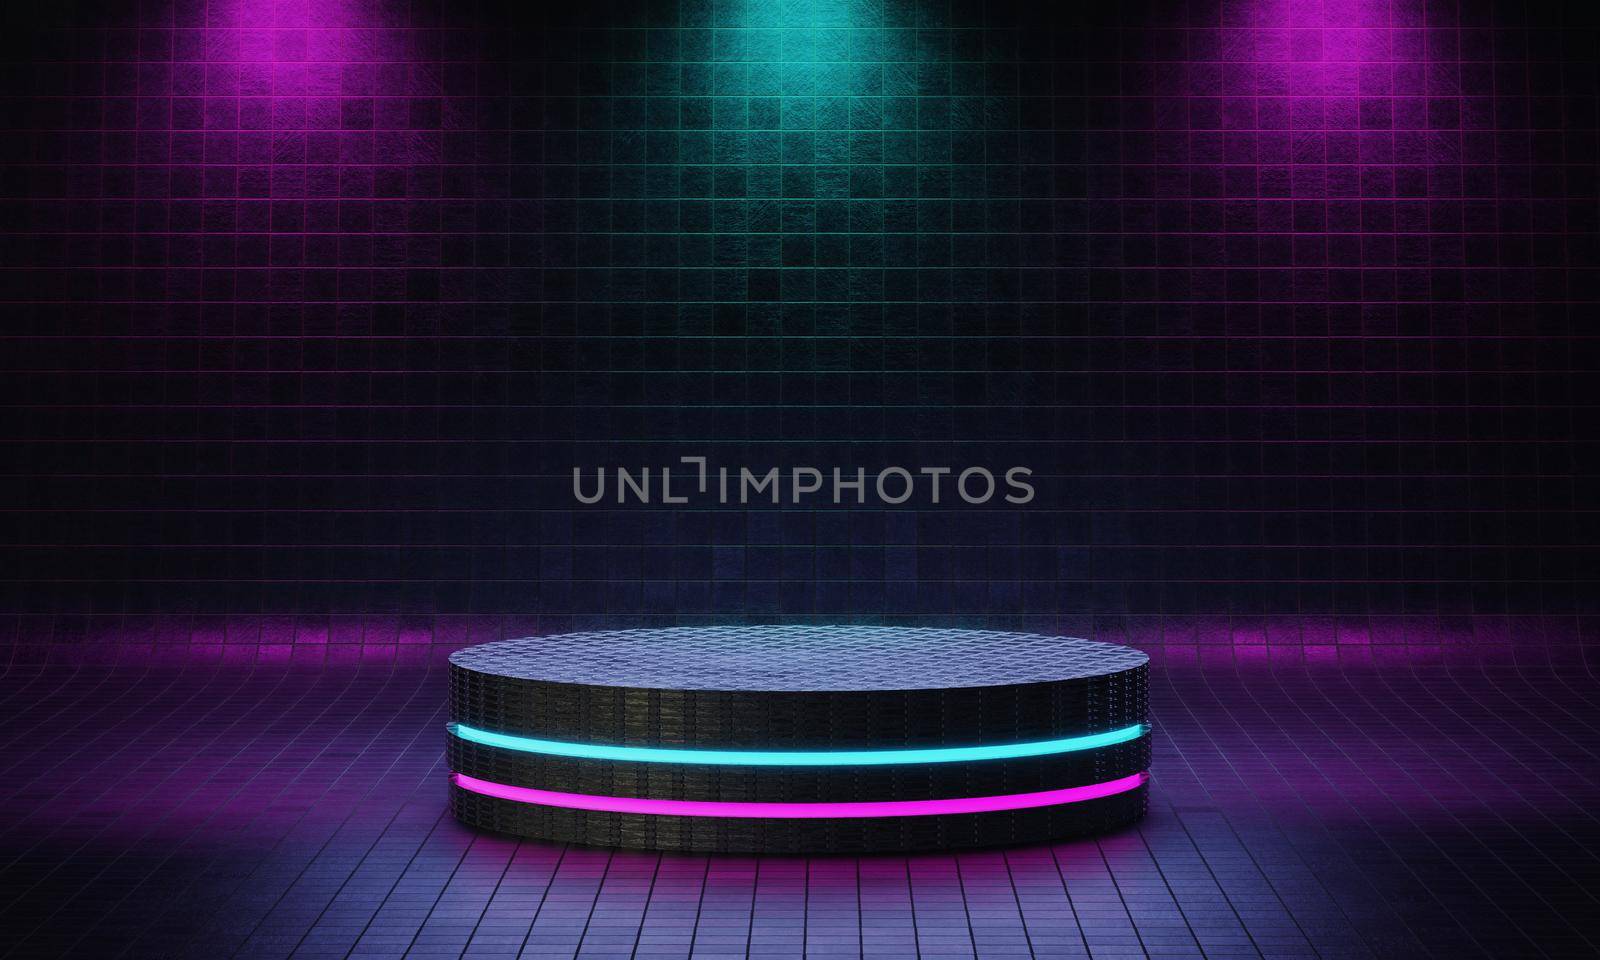 Cyberpunk product podium platform studio with blue and violet spotlight and grunge style textured background. Retro stage and Futuristics scene concept. 3D illustration rendering graphic